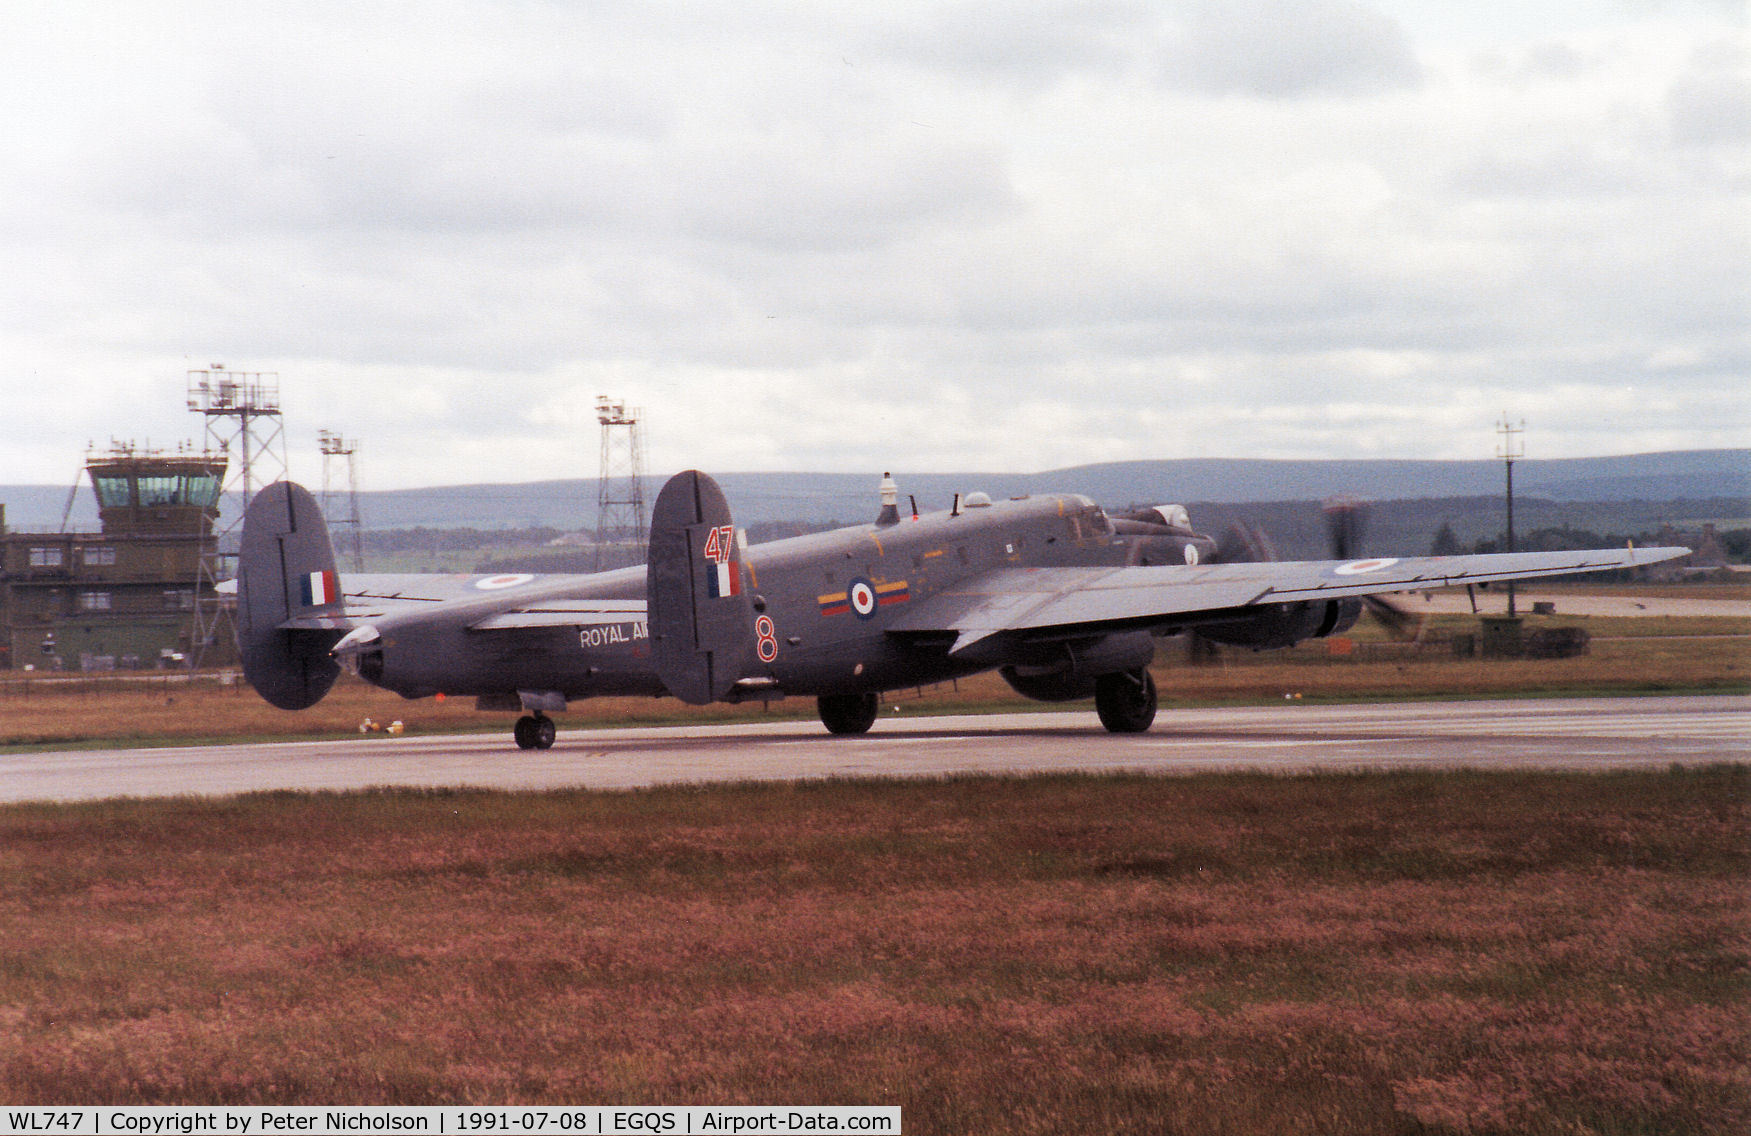 WL747, Avro 716 Shackleton AEW.2 C/N R3/696/239005, Shackleton AEW.2 of 8 Squadron preparing for take-off at RAF Lossiemouth in the Summer of 1991.